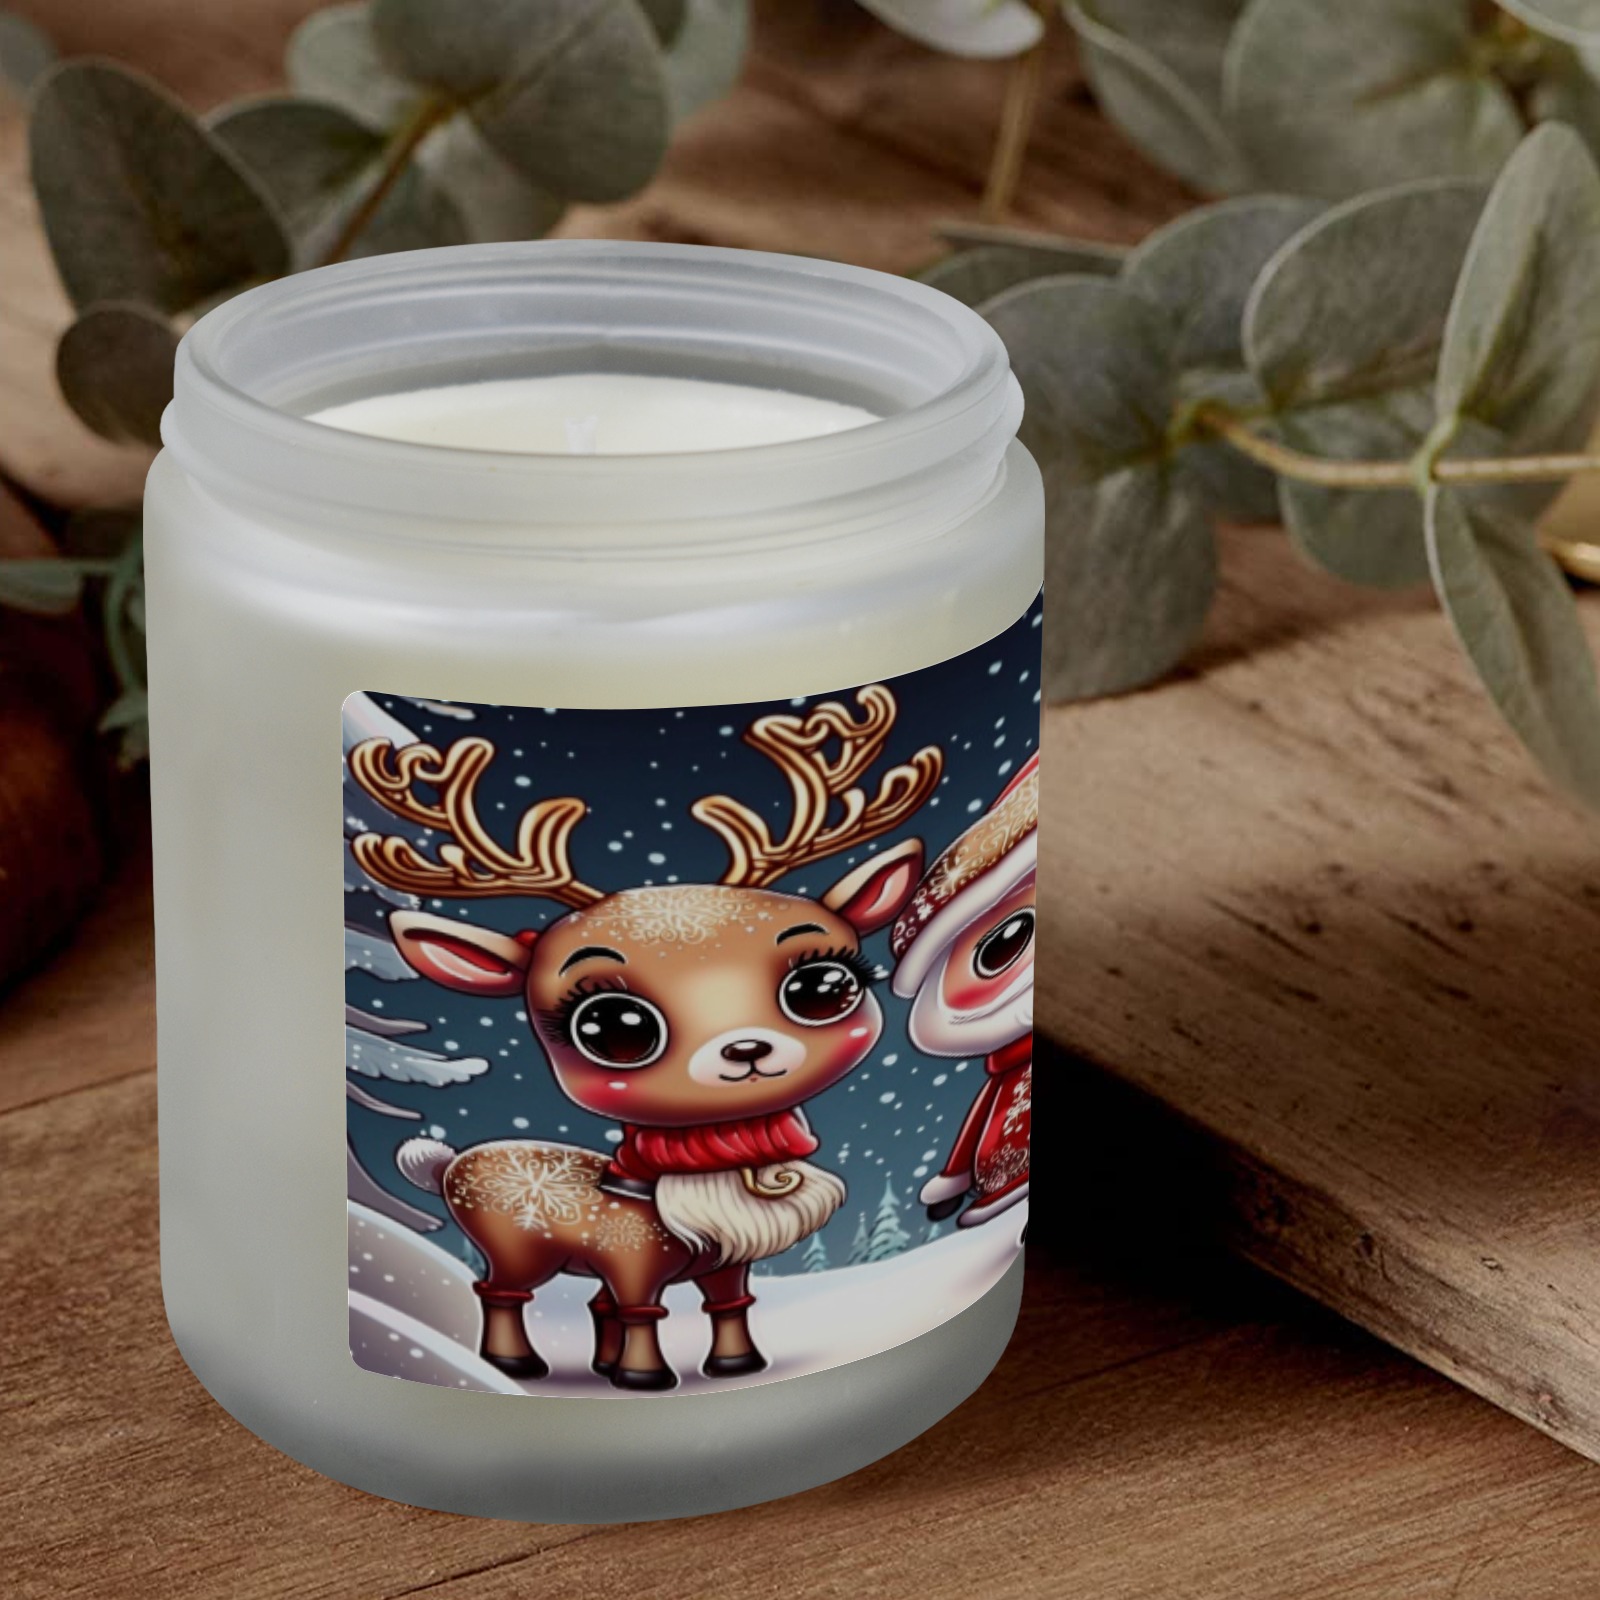 Santa and Reindeer Frosted Glass Candle Cup - Large Size (Lavender&Lemon)